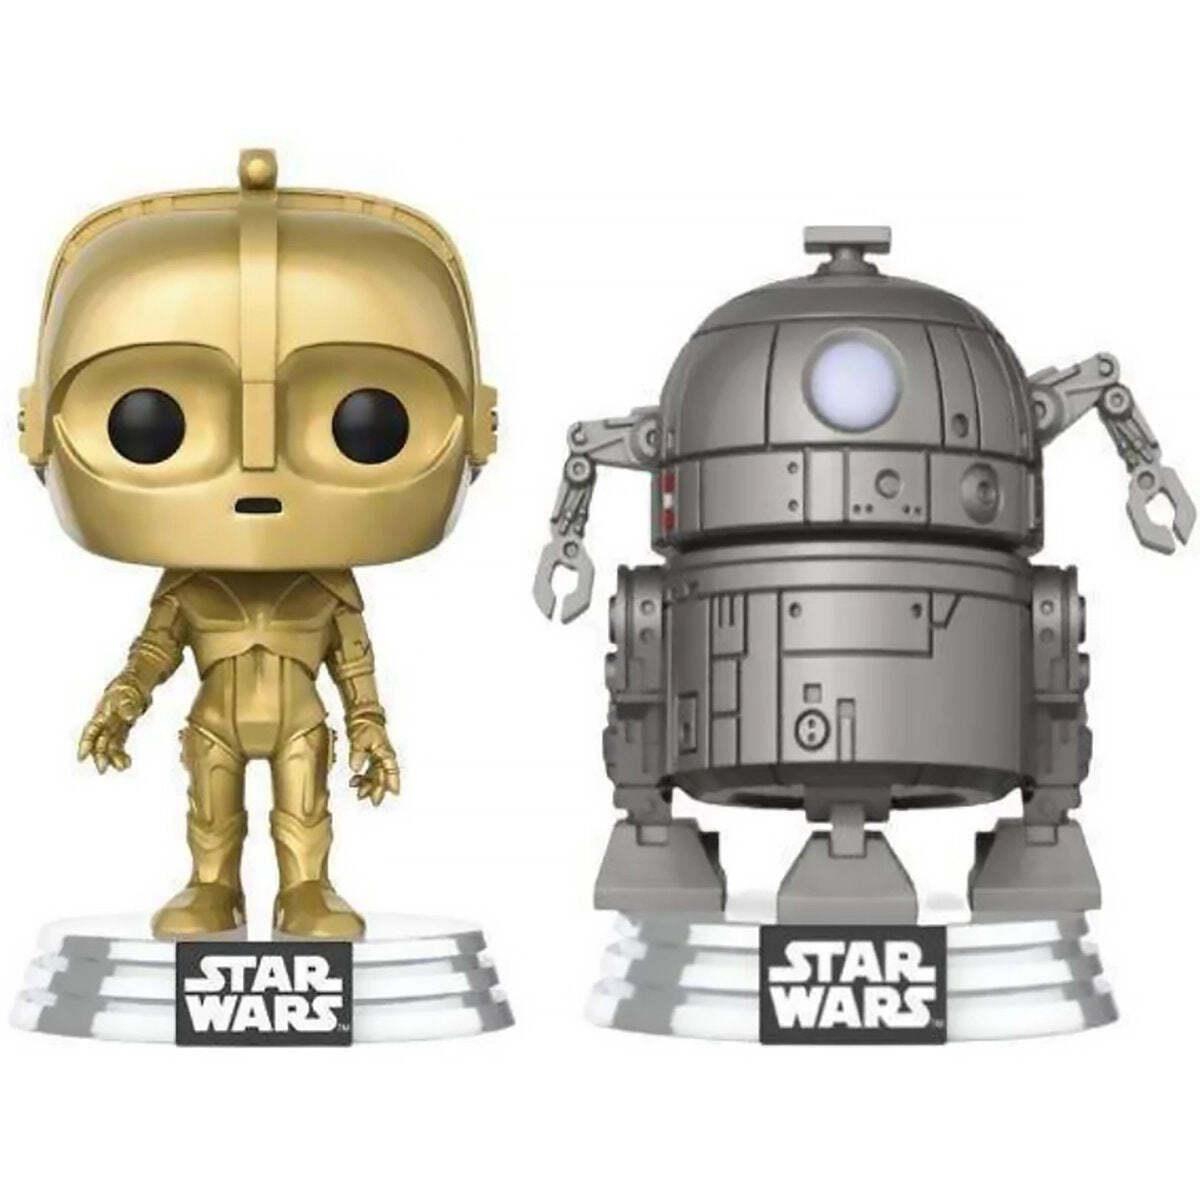 Funko POP! Star Wars C-3PO and R2-D2 Concept Series 2 Pack Bobble Heads Vinyl Figures - BumbleToys - 18+, Boys, Characters, OXE, Pre-Order, star wars